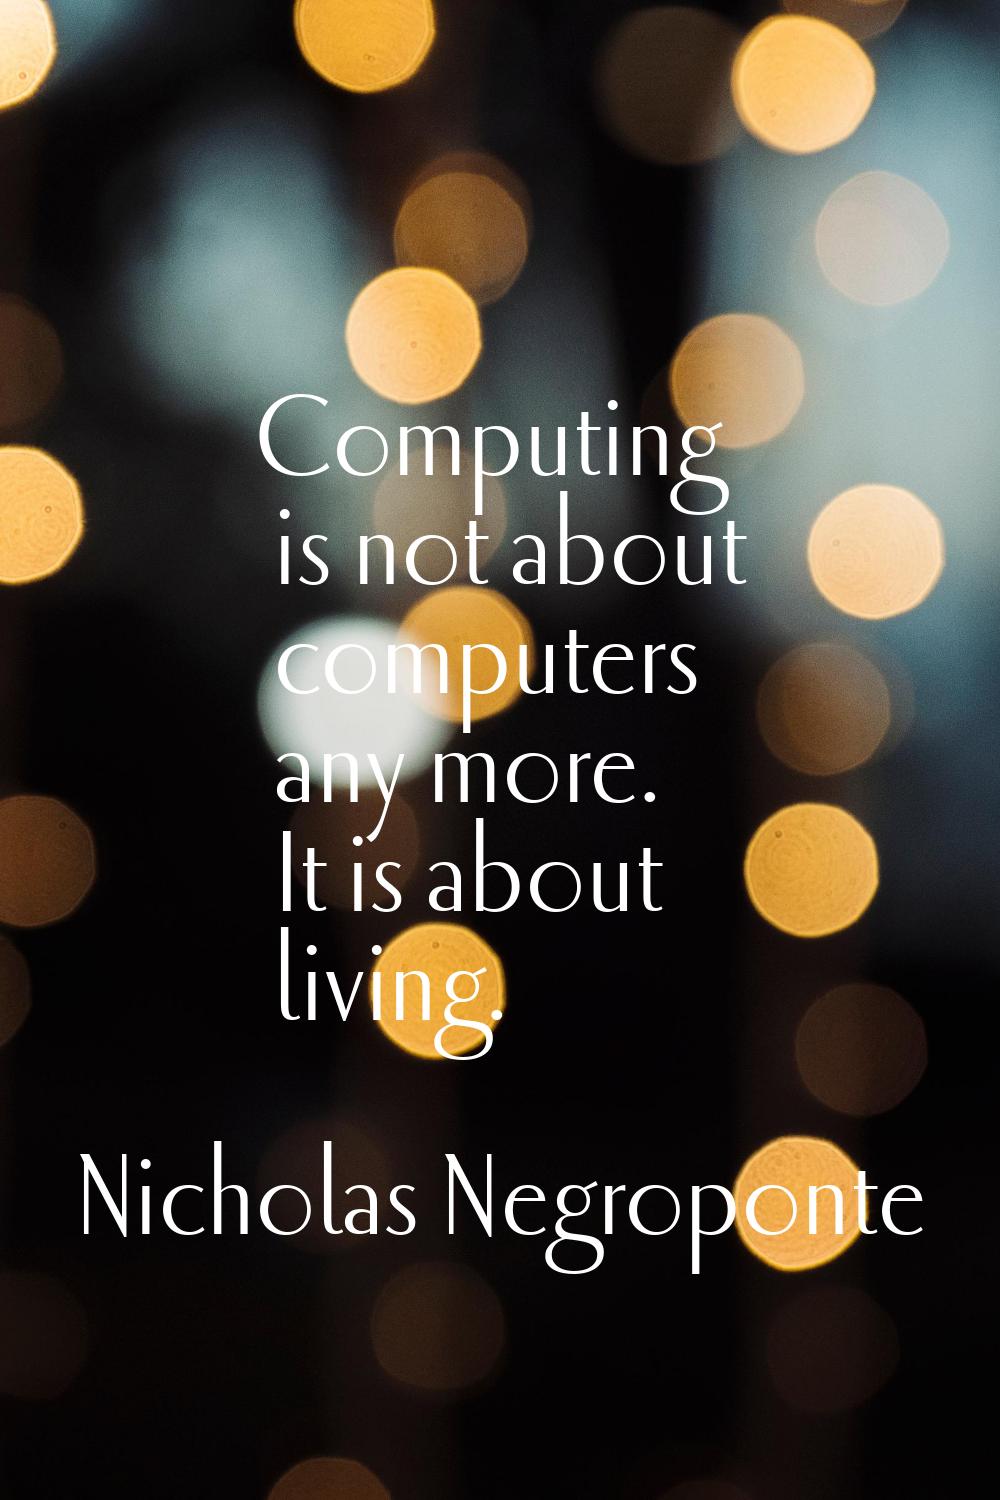 Computing is not about computers any more. It is about living.